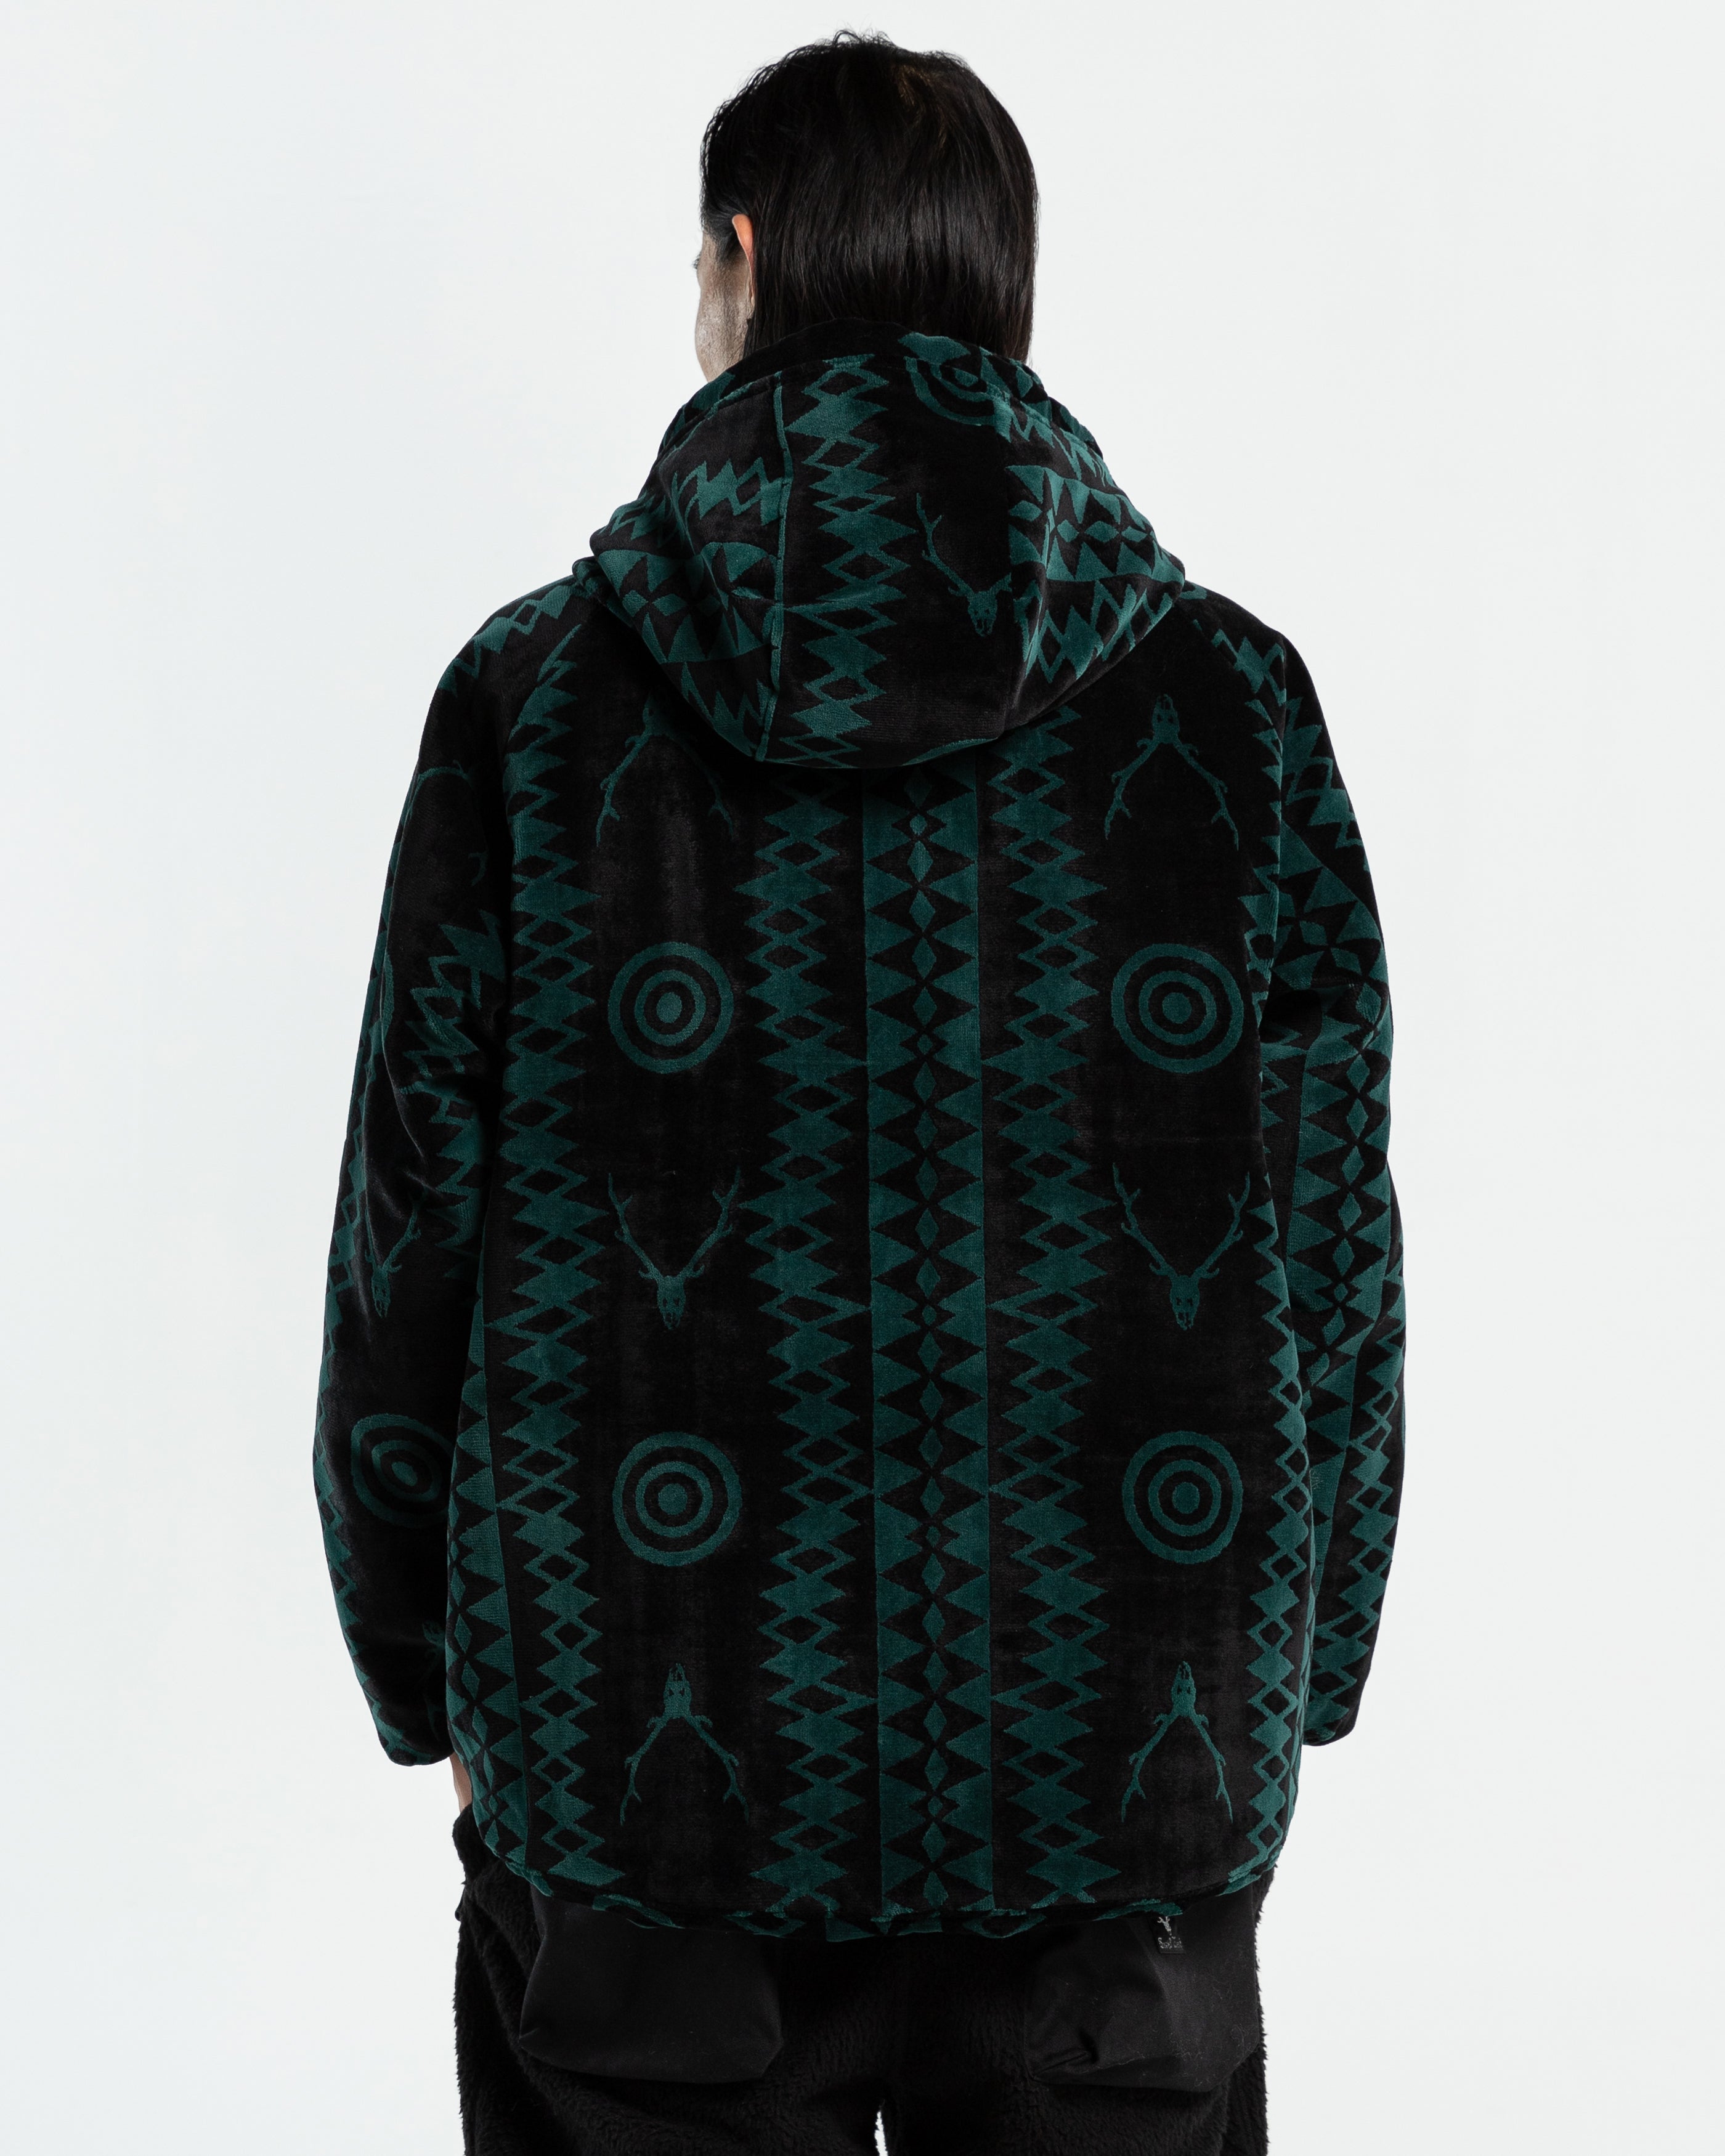 Weather Effect Jacket in Black and Green